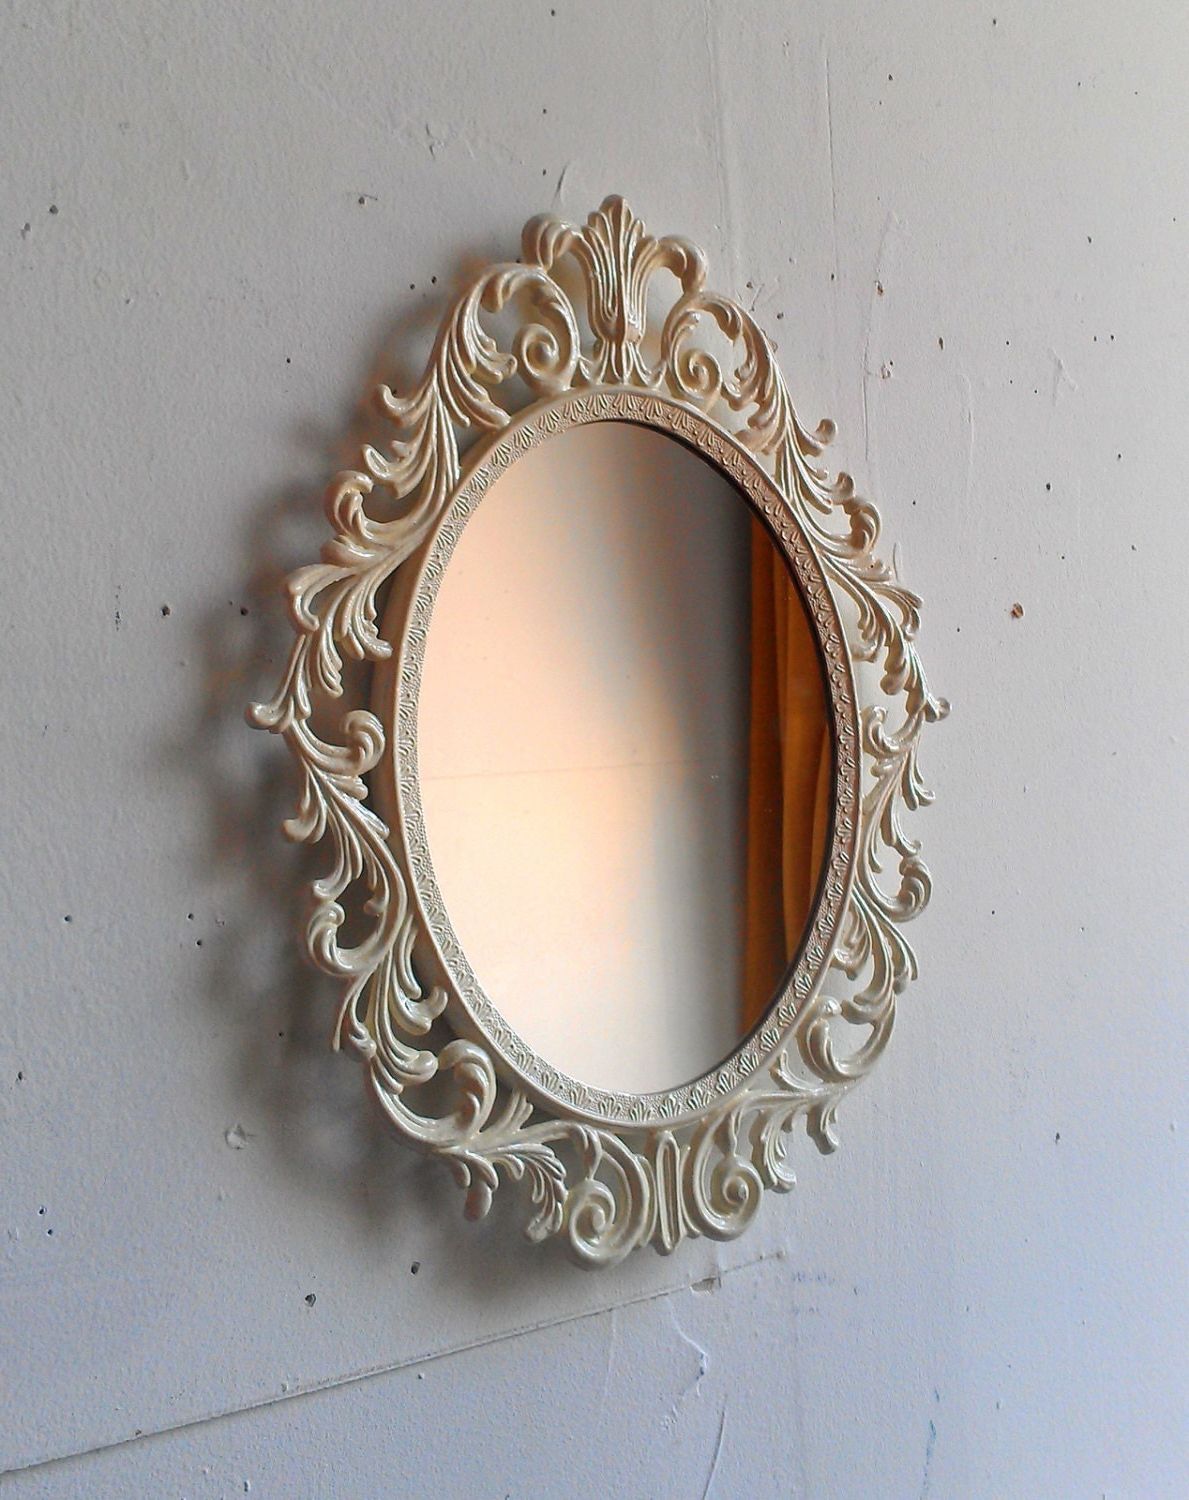 Well Known Oval Princess Mirror In Vintage Metal Filigree Frame 13 By For Antique Aluminum Wall Mirrors (View 4 of 15)